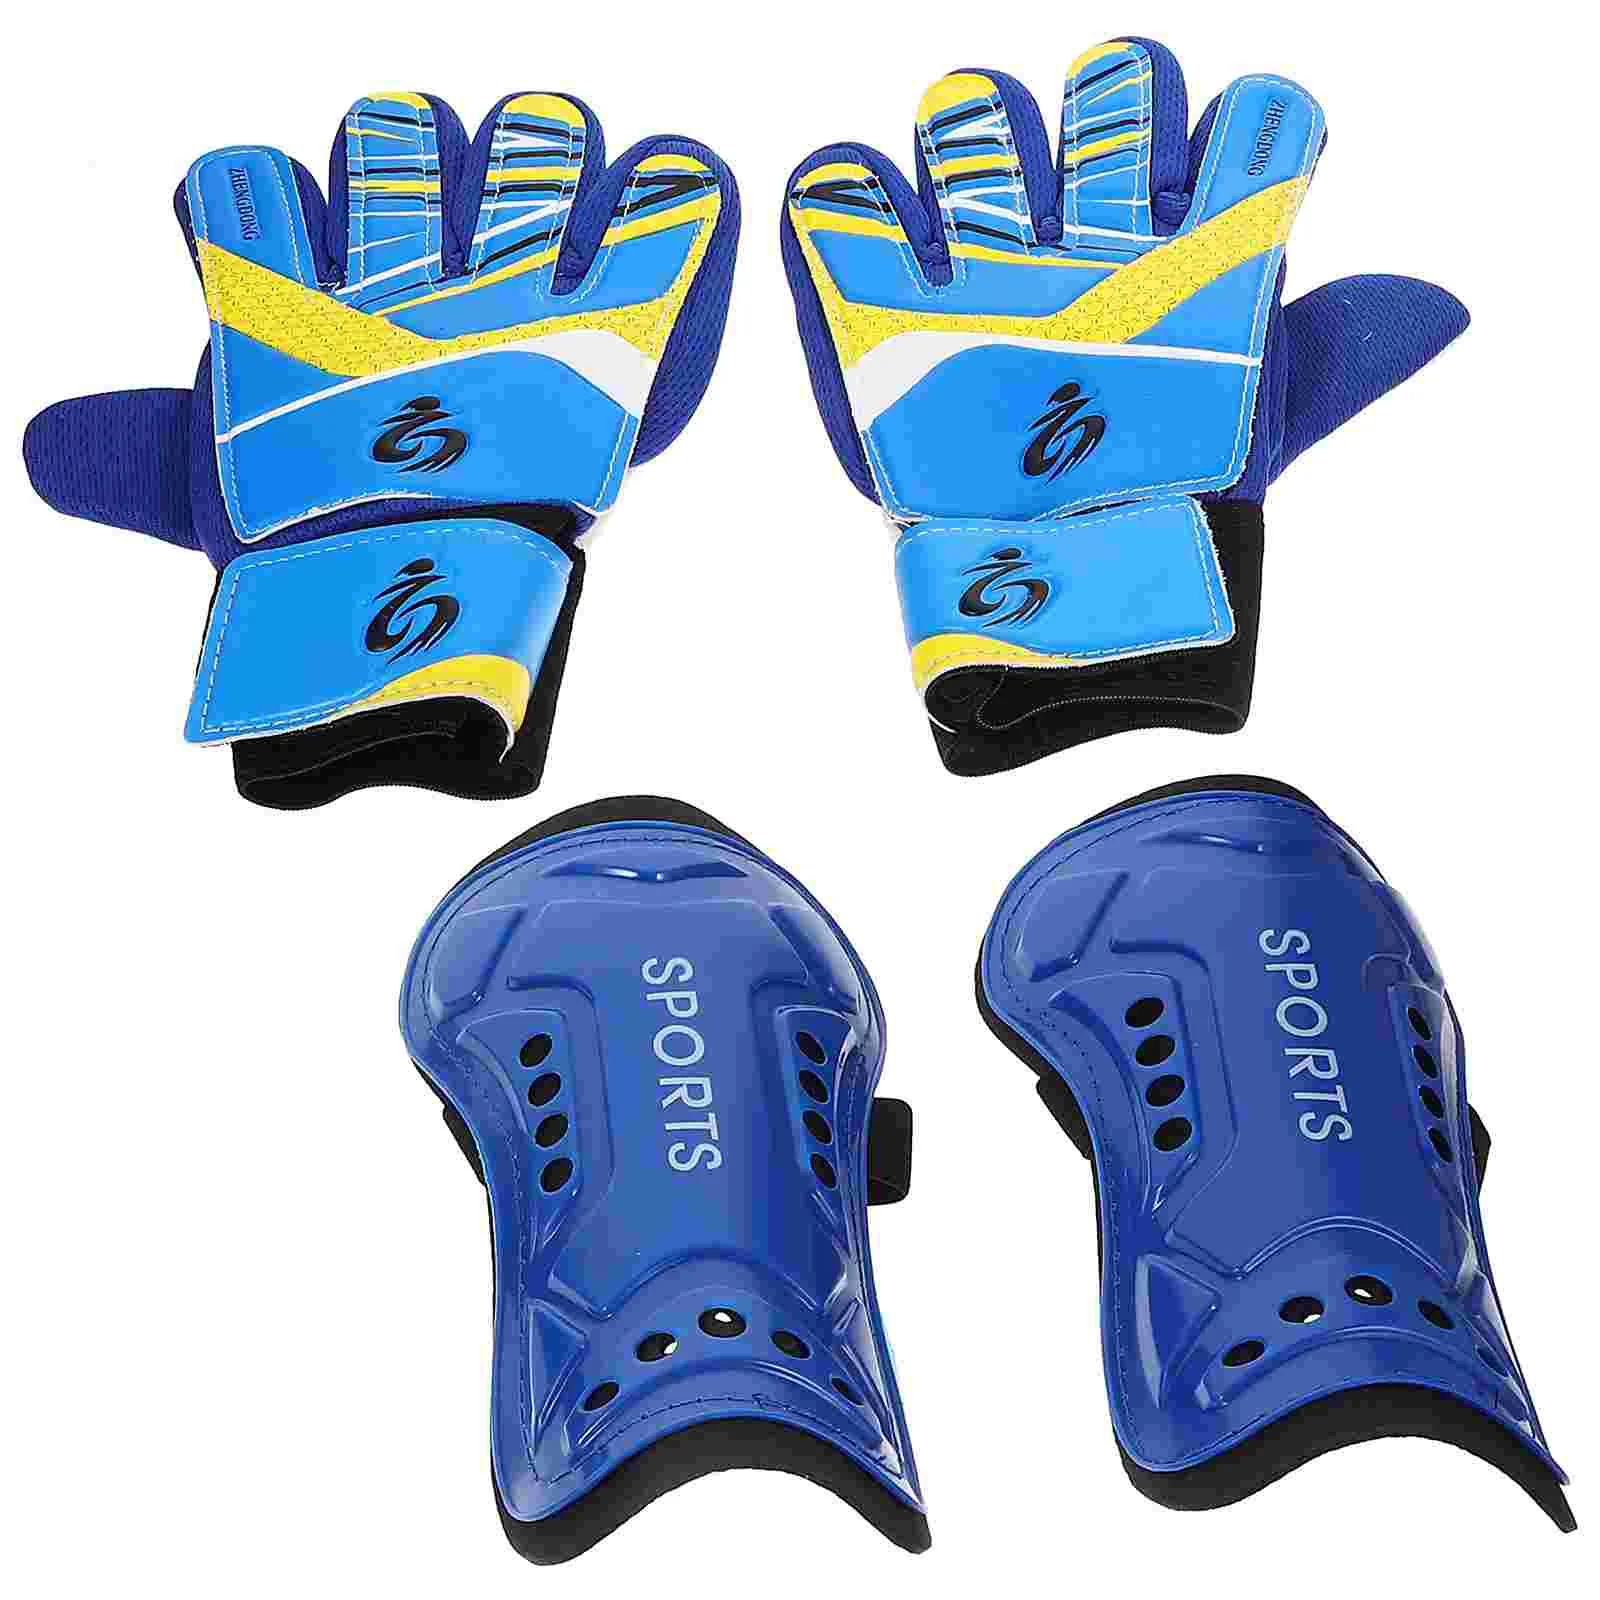 

Soccer Goalie and Knee Pads 1 Set Football Goalkeeper Protection Gear Set Including and Shin Guards for Soccer Sports (, Blue )